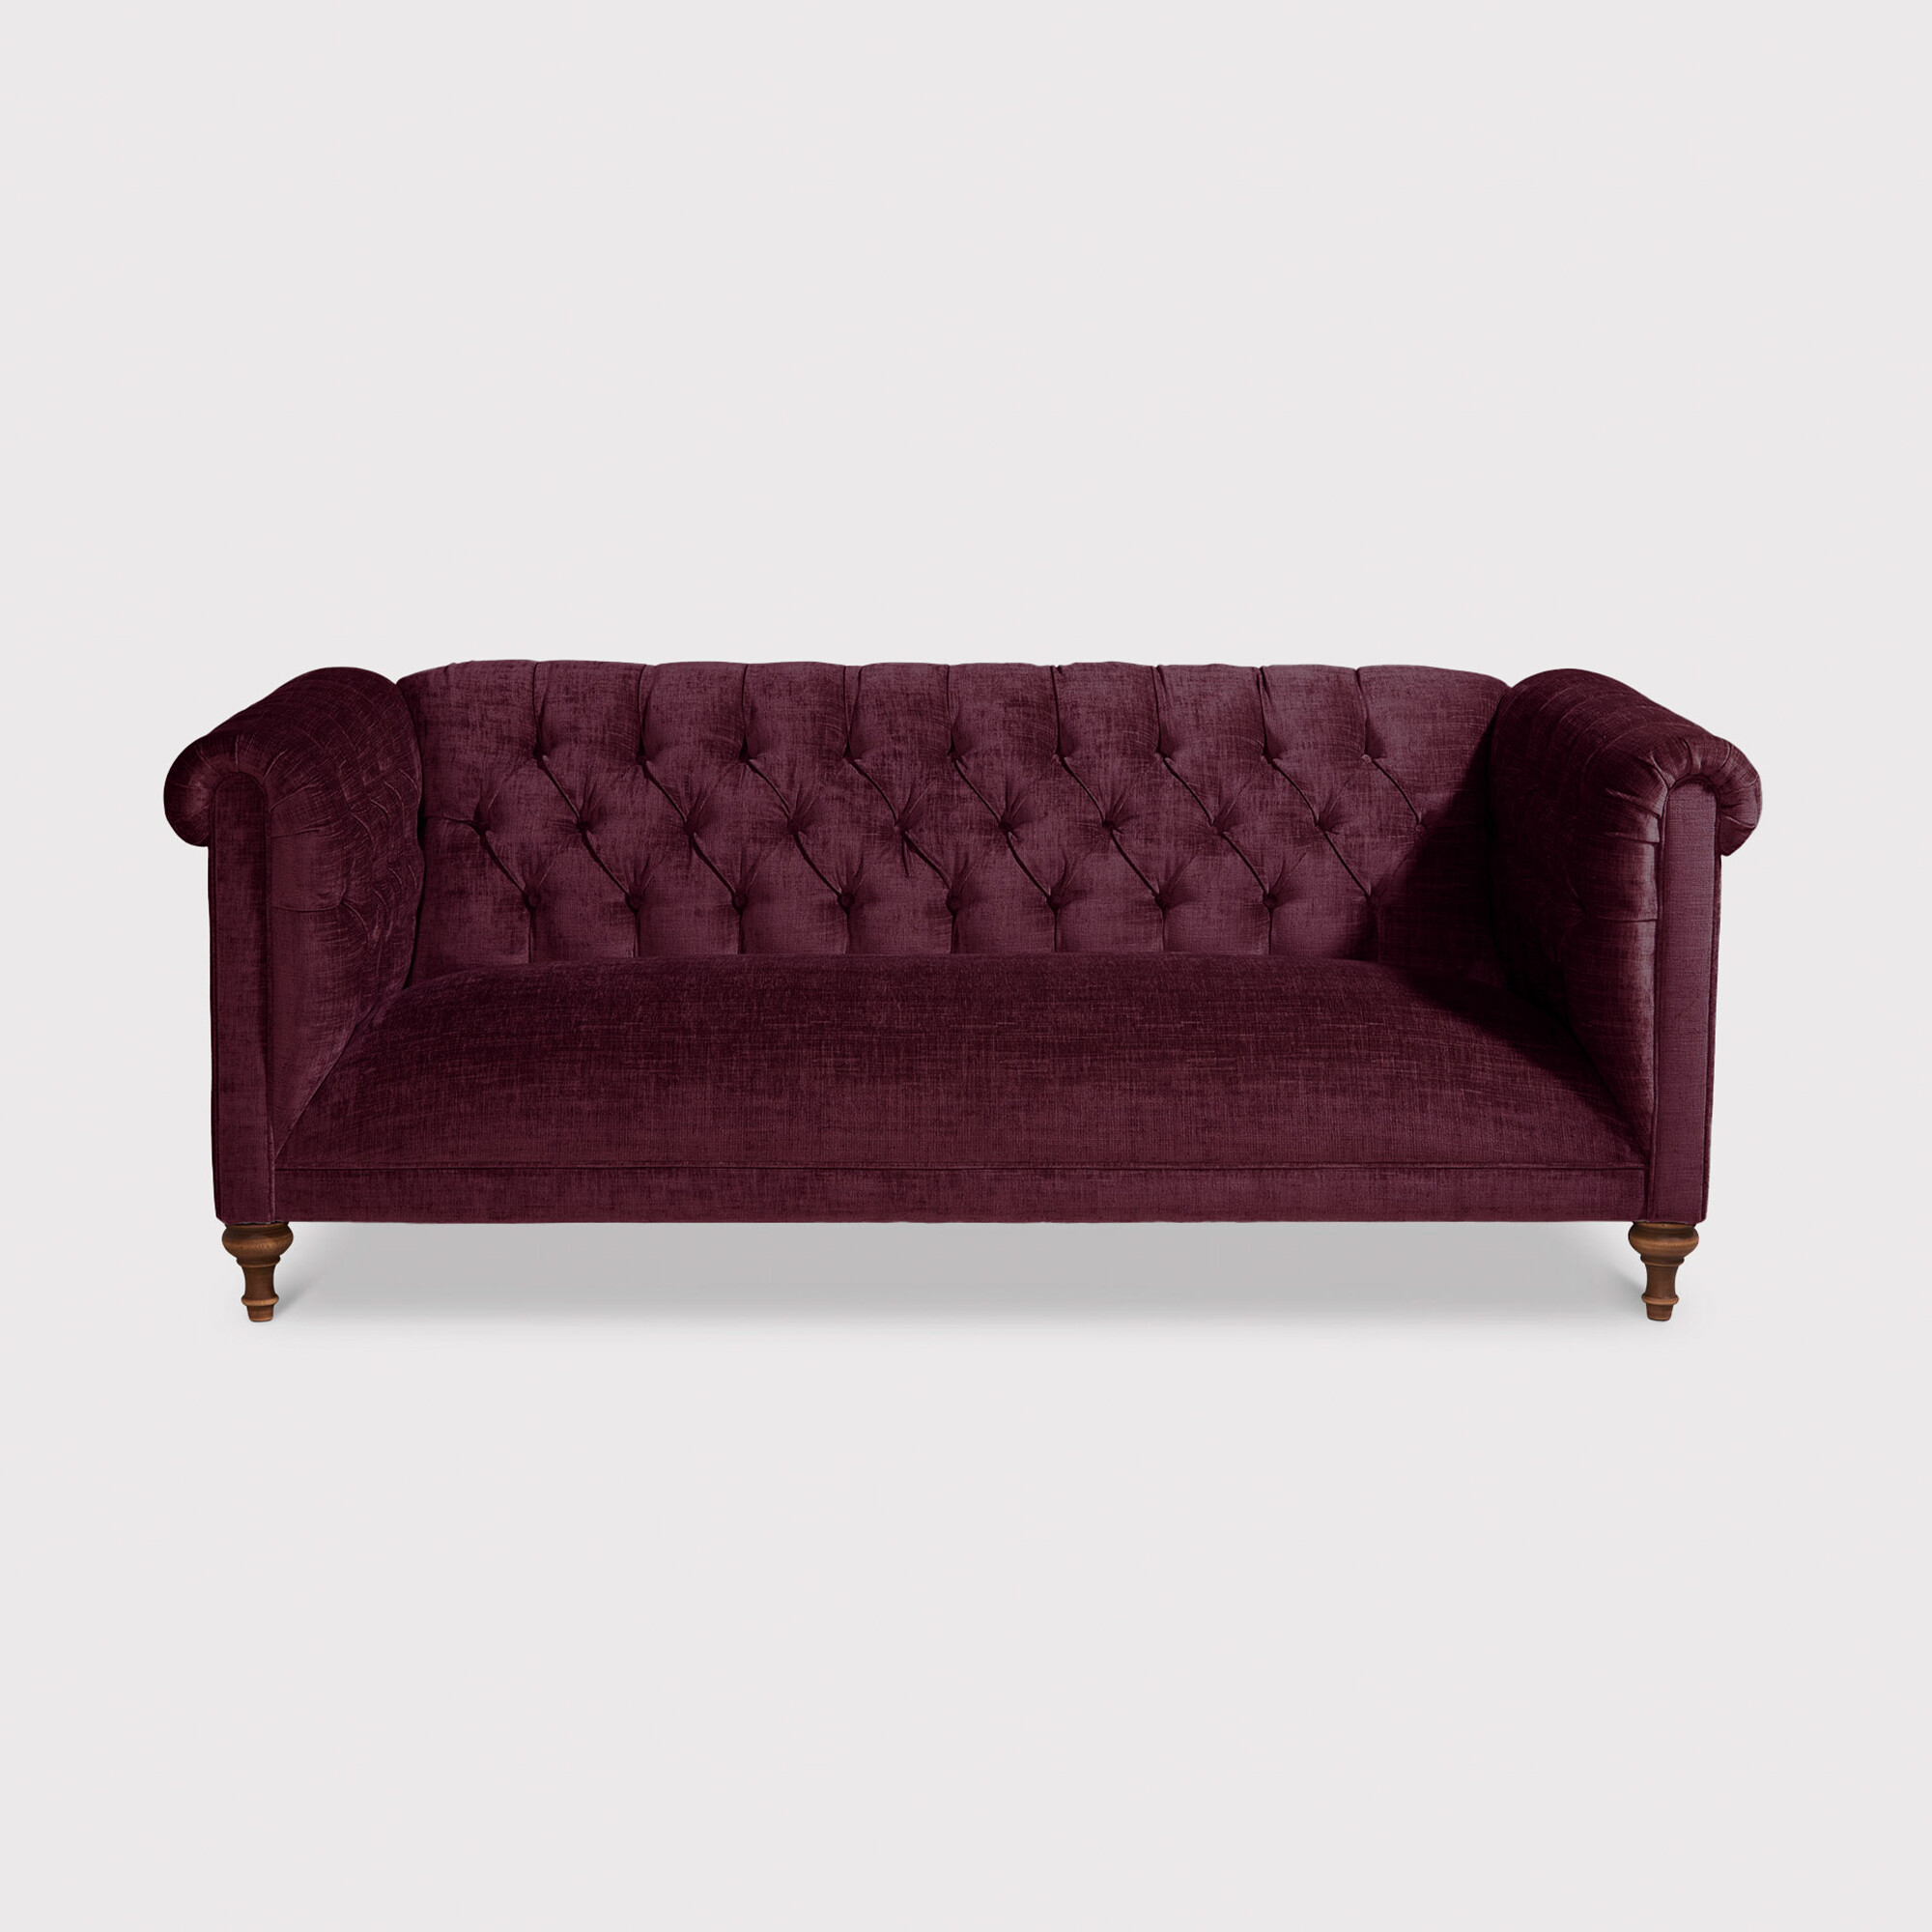 Cartmel 3 Seater Sofa, Red Fabric | Barker & Stonehouse